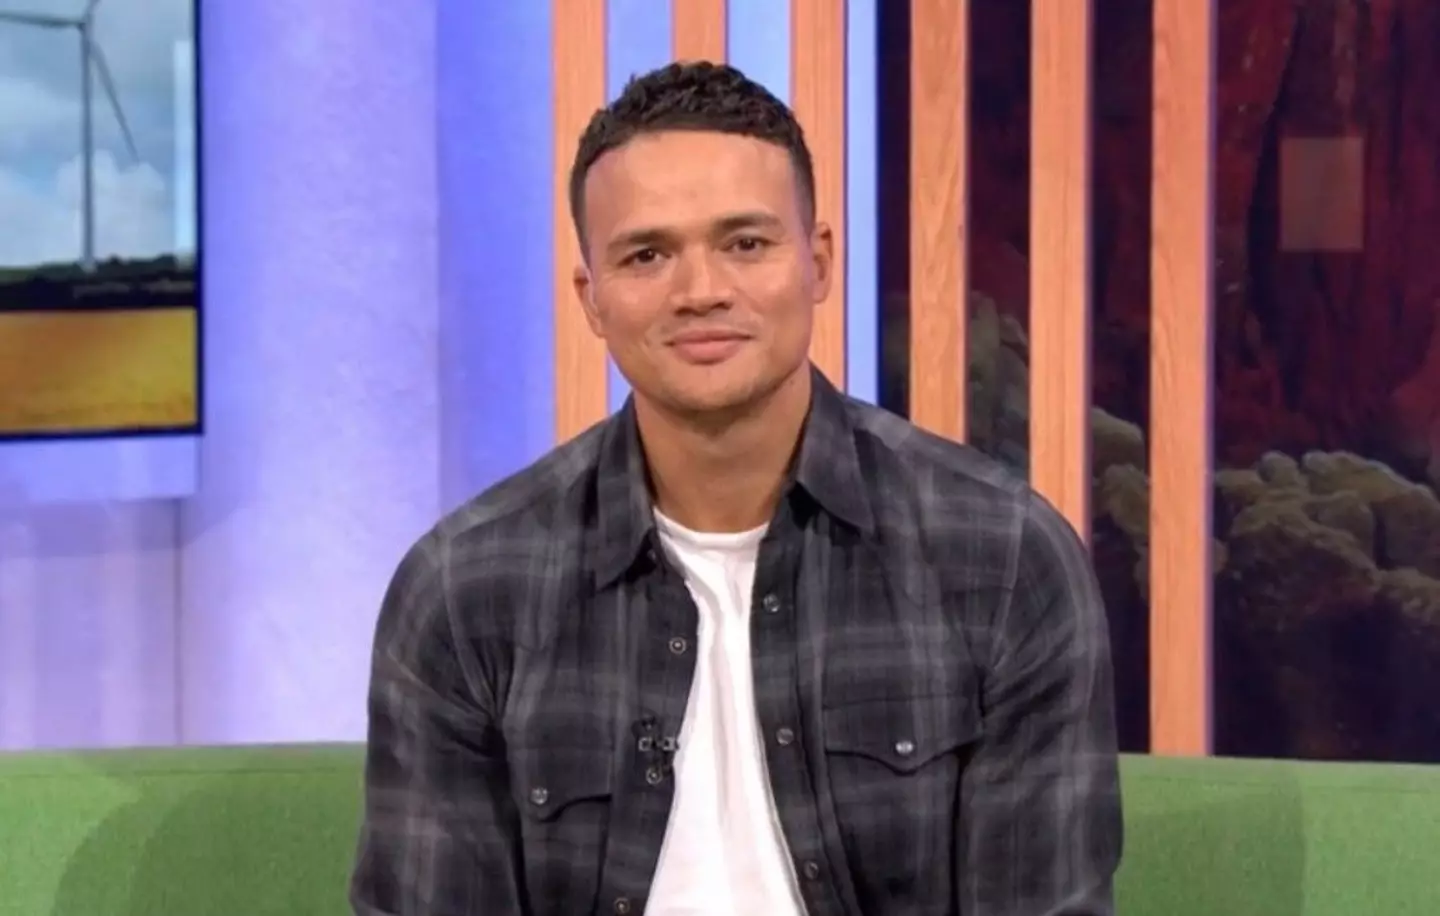 Jermaine Jenas could be a potential successor for when Lineker eventually steps down from MOTD.